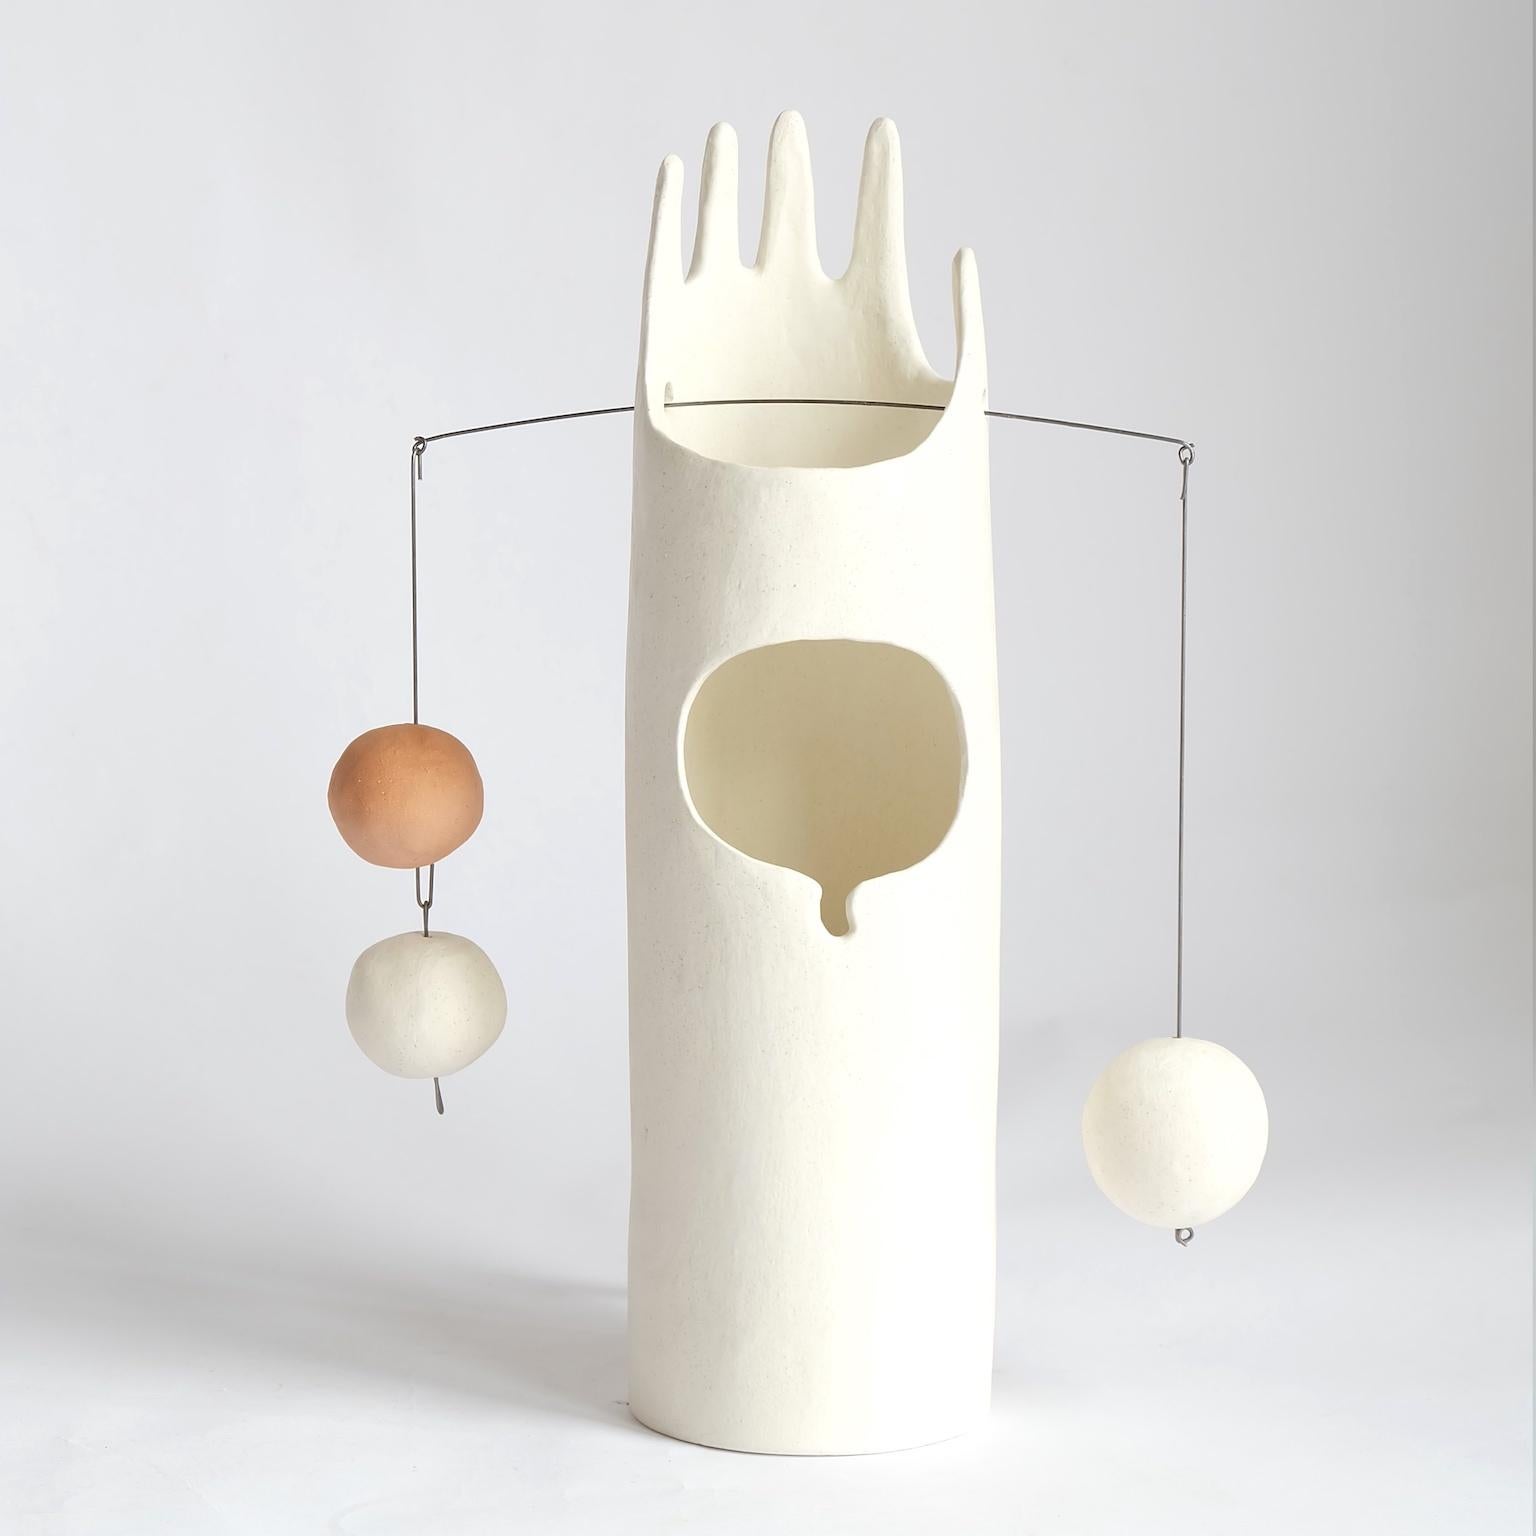 Rico's Cousin Neco is a contemporary hand-built sculptural ceramic table lamp that inspires the joy of working with hands through unpacking, assembling and balancing weights. The handmade ceramic globes and the hanging steel wire come fit right